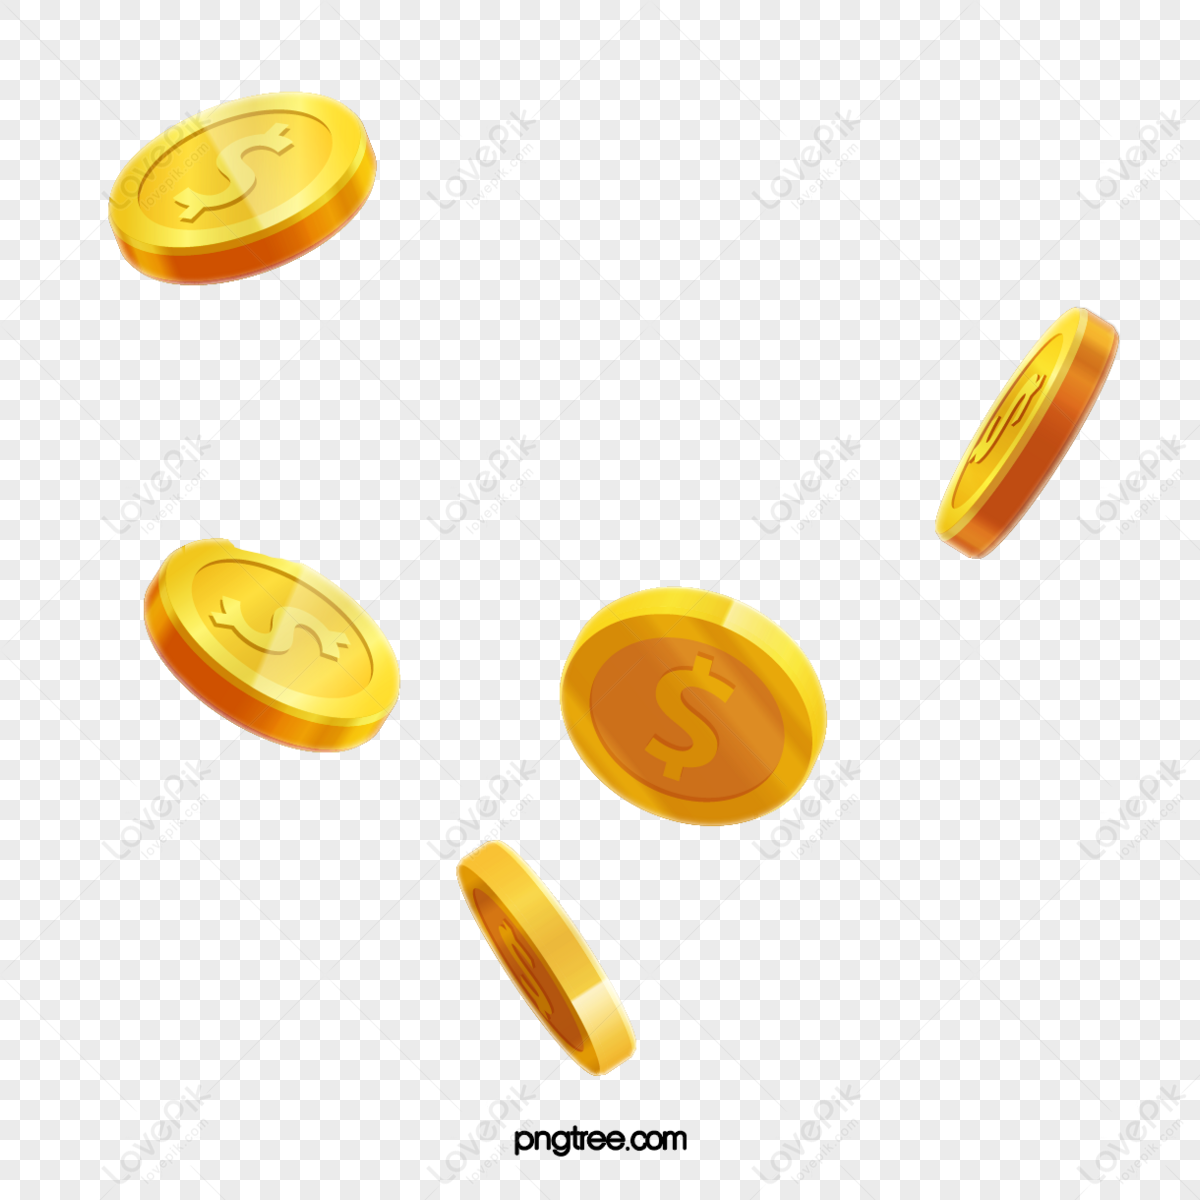 Gold Coin Number Money Dollar Money Coin,coin Spend,game PNG Hd ...